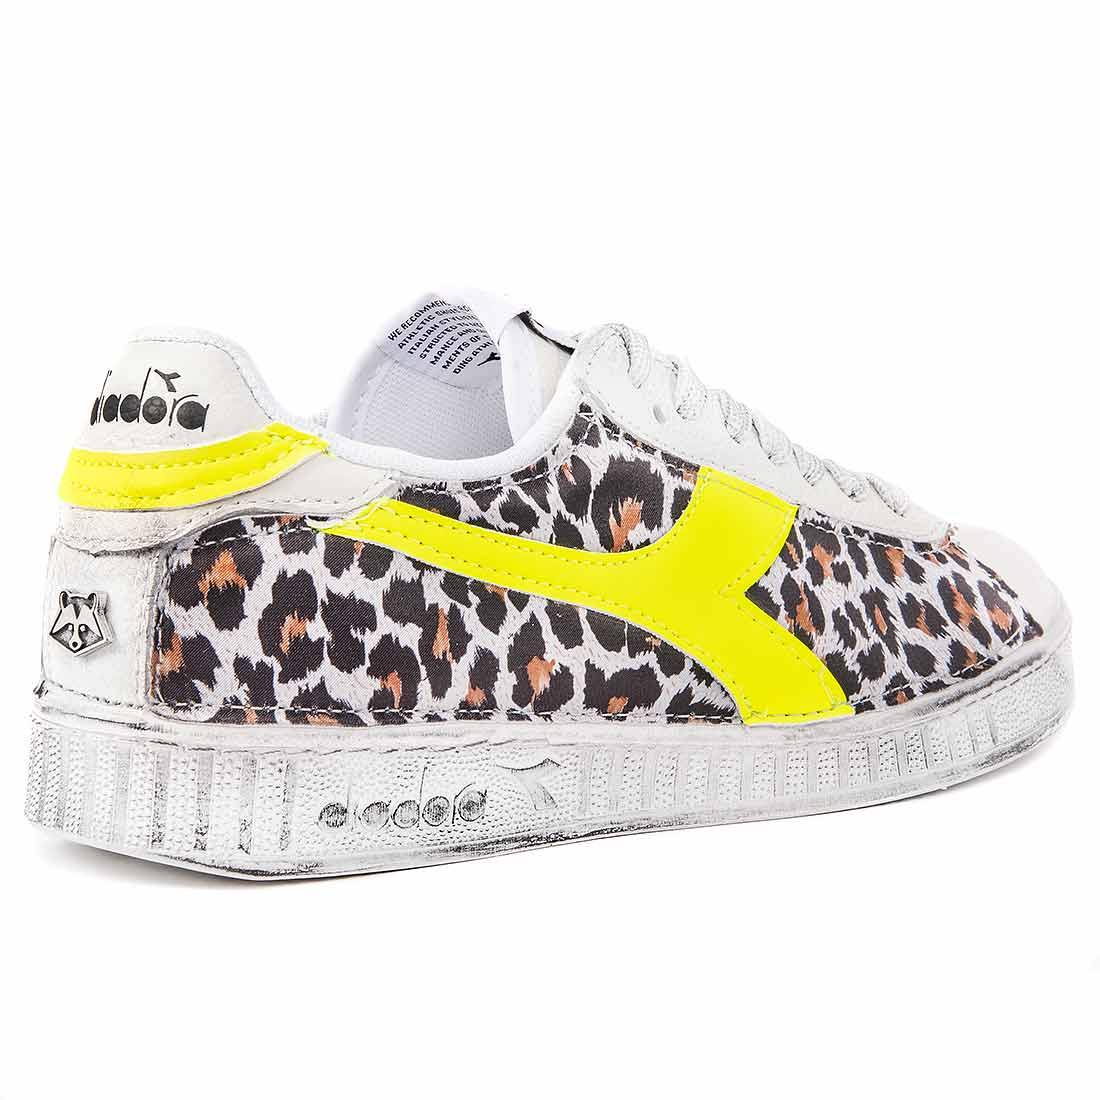 Snakers Diadora Game low leopardate maculate giallo fluo fluorescente animalier